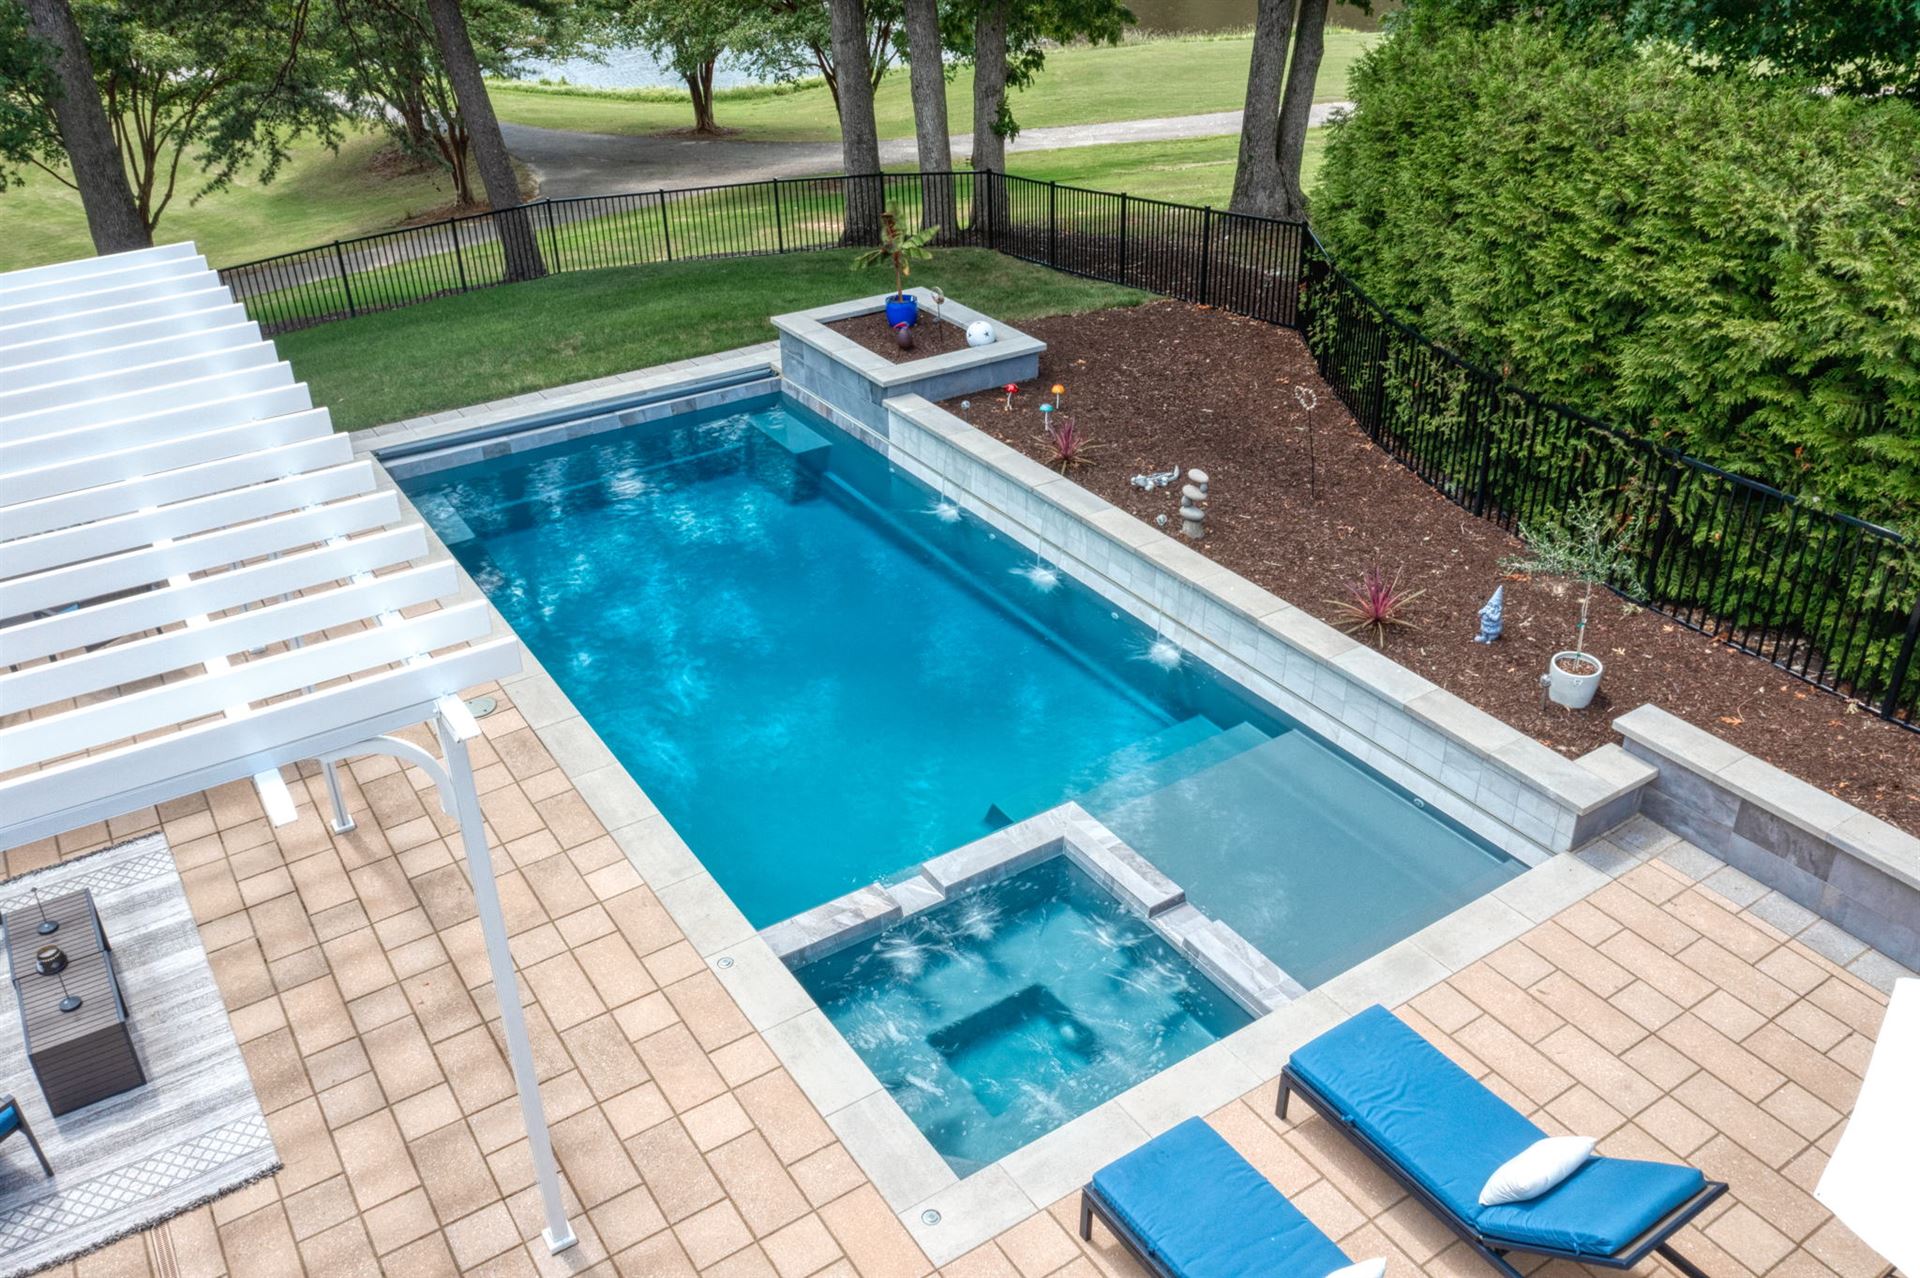 River Pools X36 in Diamond color with cascade, concrete paver patio, and natural stone coping